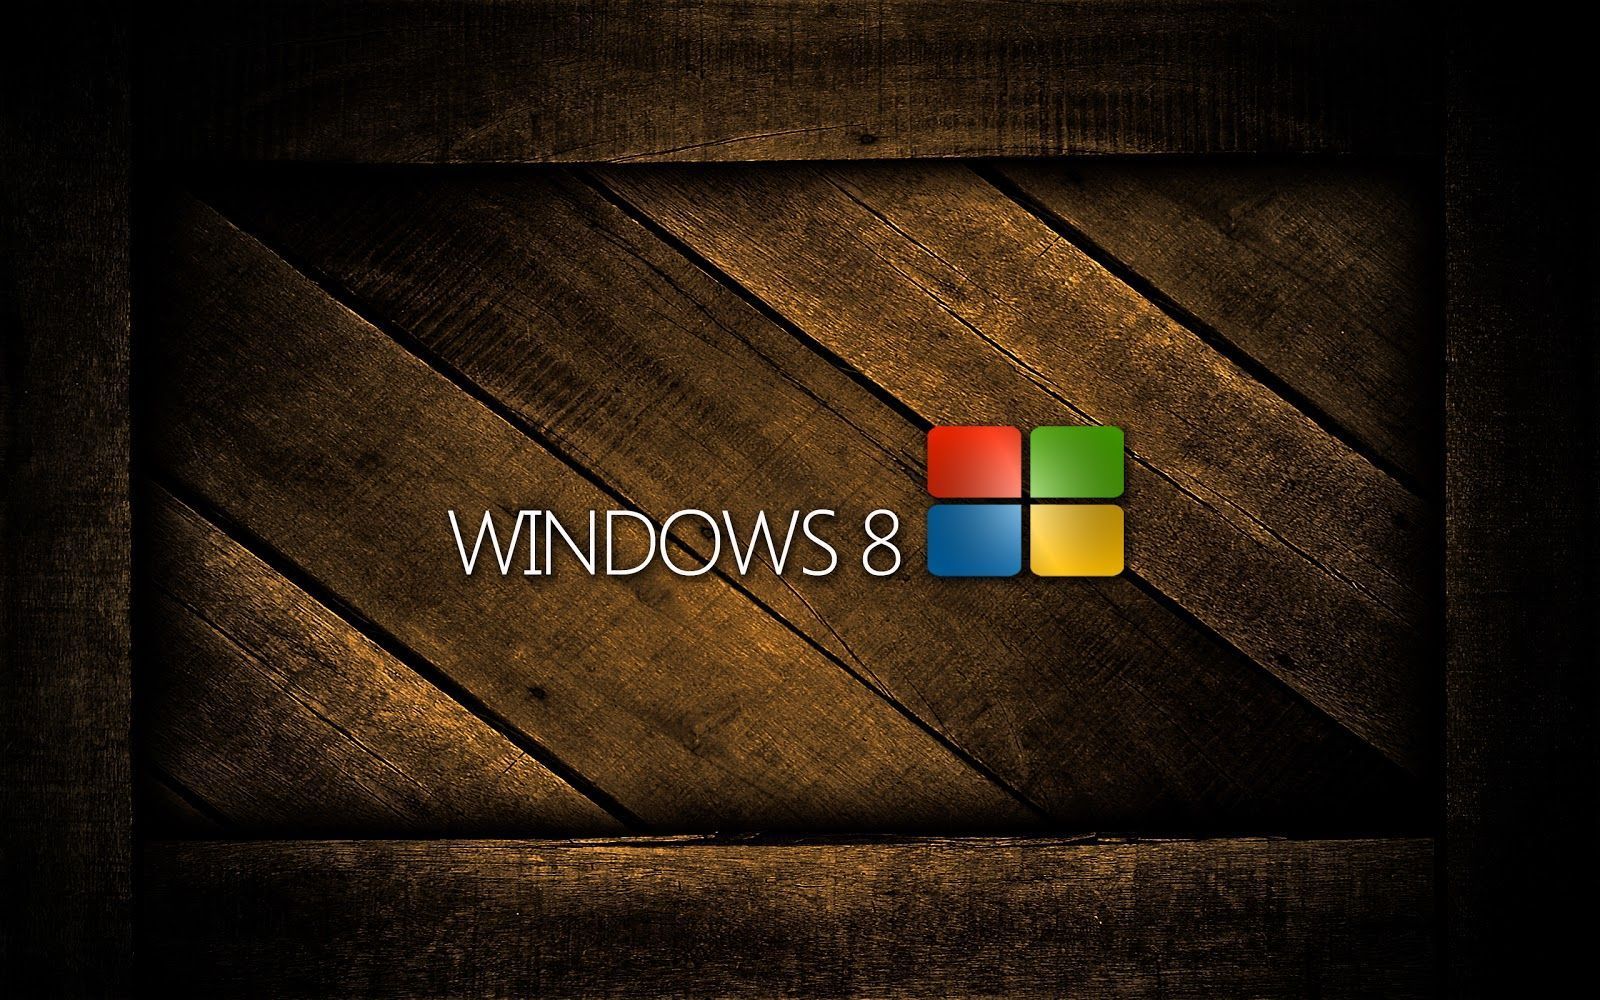 Windows 8 Wallpapers HD 1080p Free Download Group (83+)